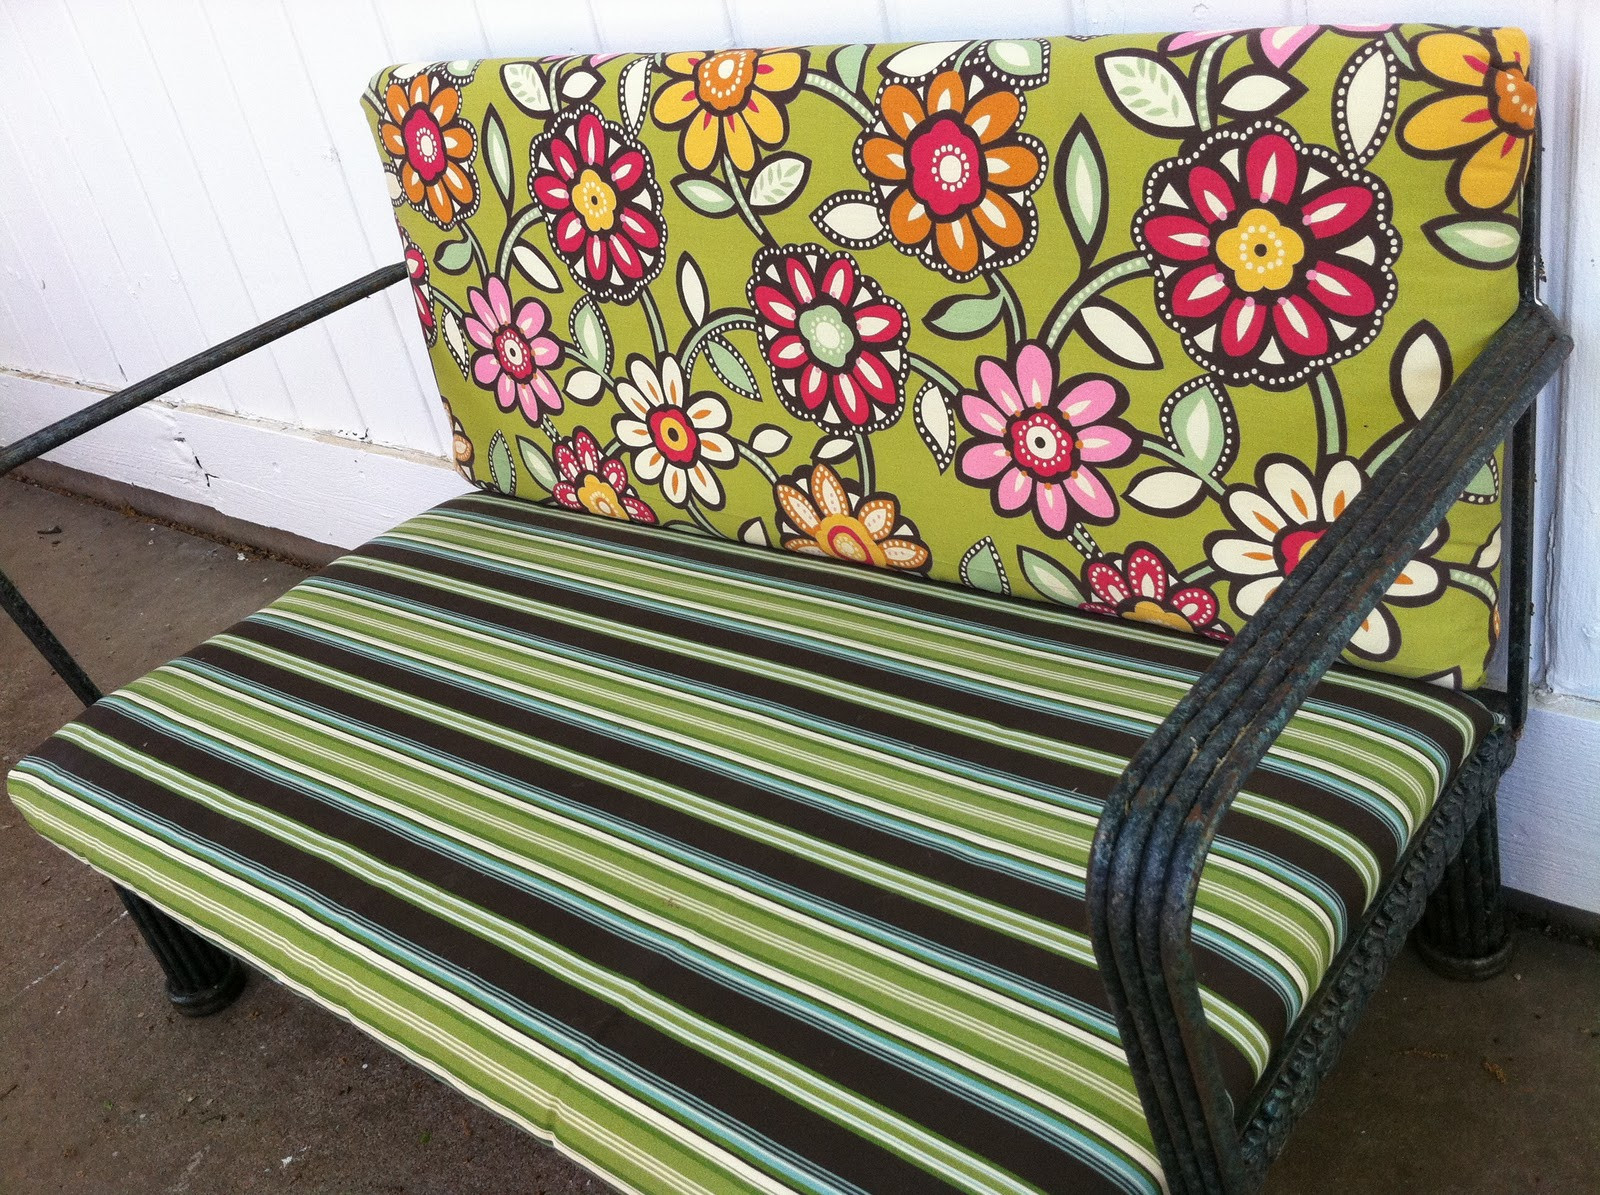 DIY Outdoor Furniture Covers
 Naptime = Craft time No sew Patio Furniture Cushion Re do